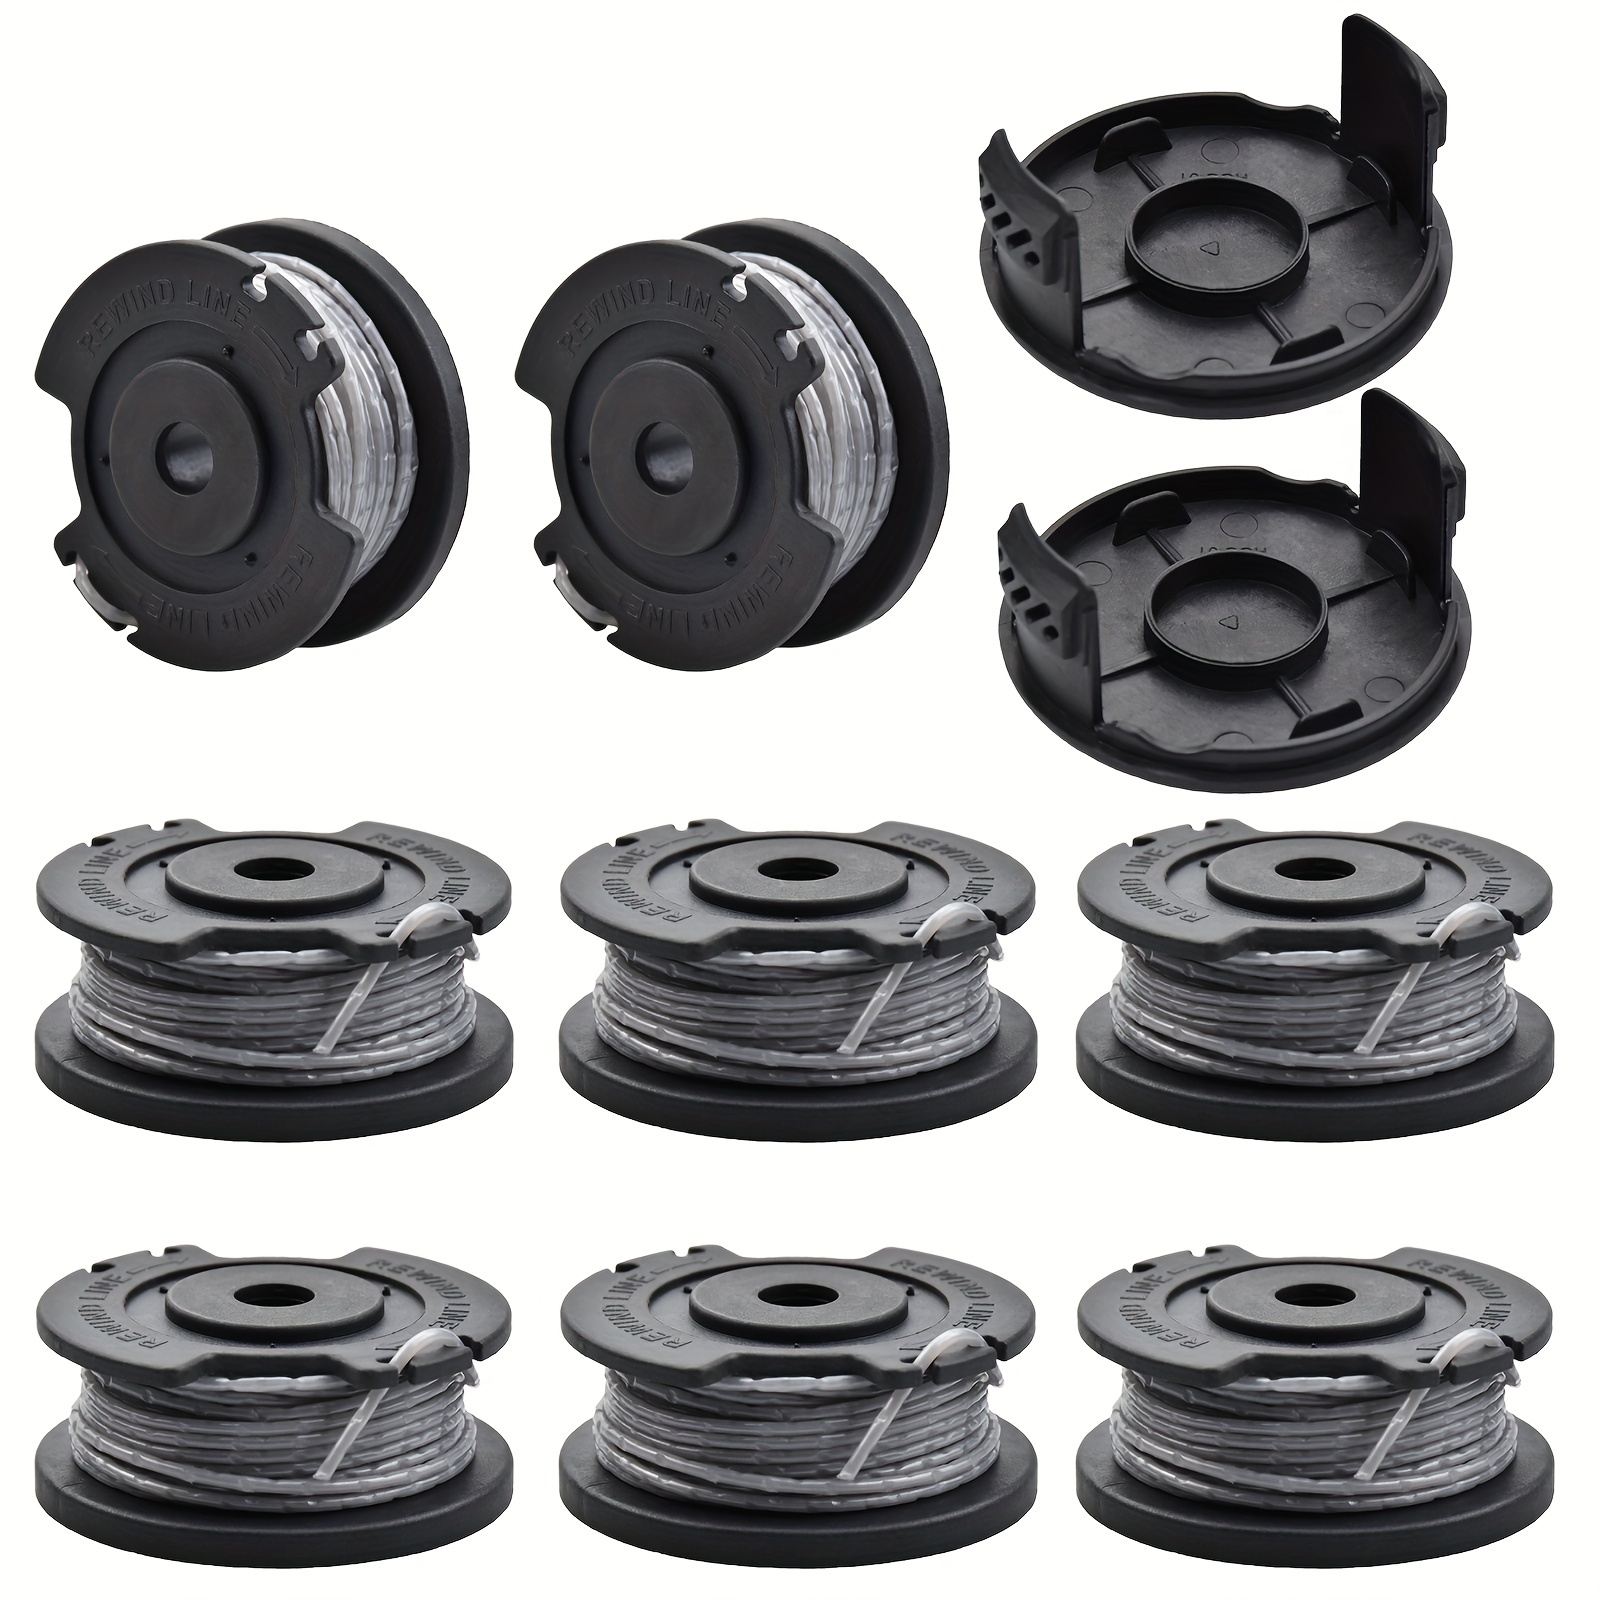 1 *For Black & Decker Replacement String Trimmer Strimmer Spool Cap Cover  GL5530 Spool Replacement High Quality - AliExpress